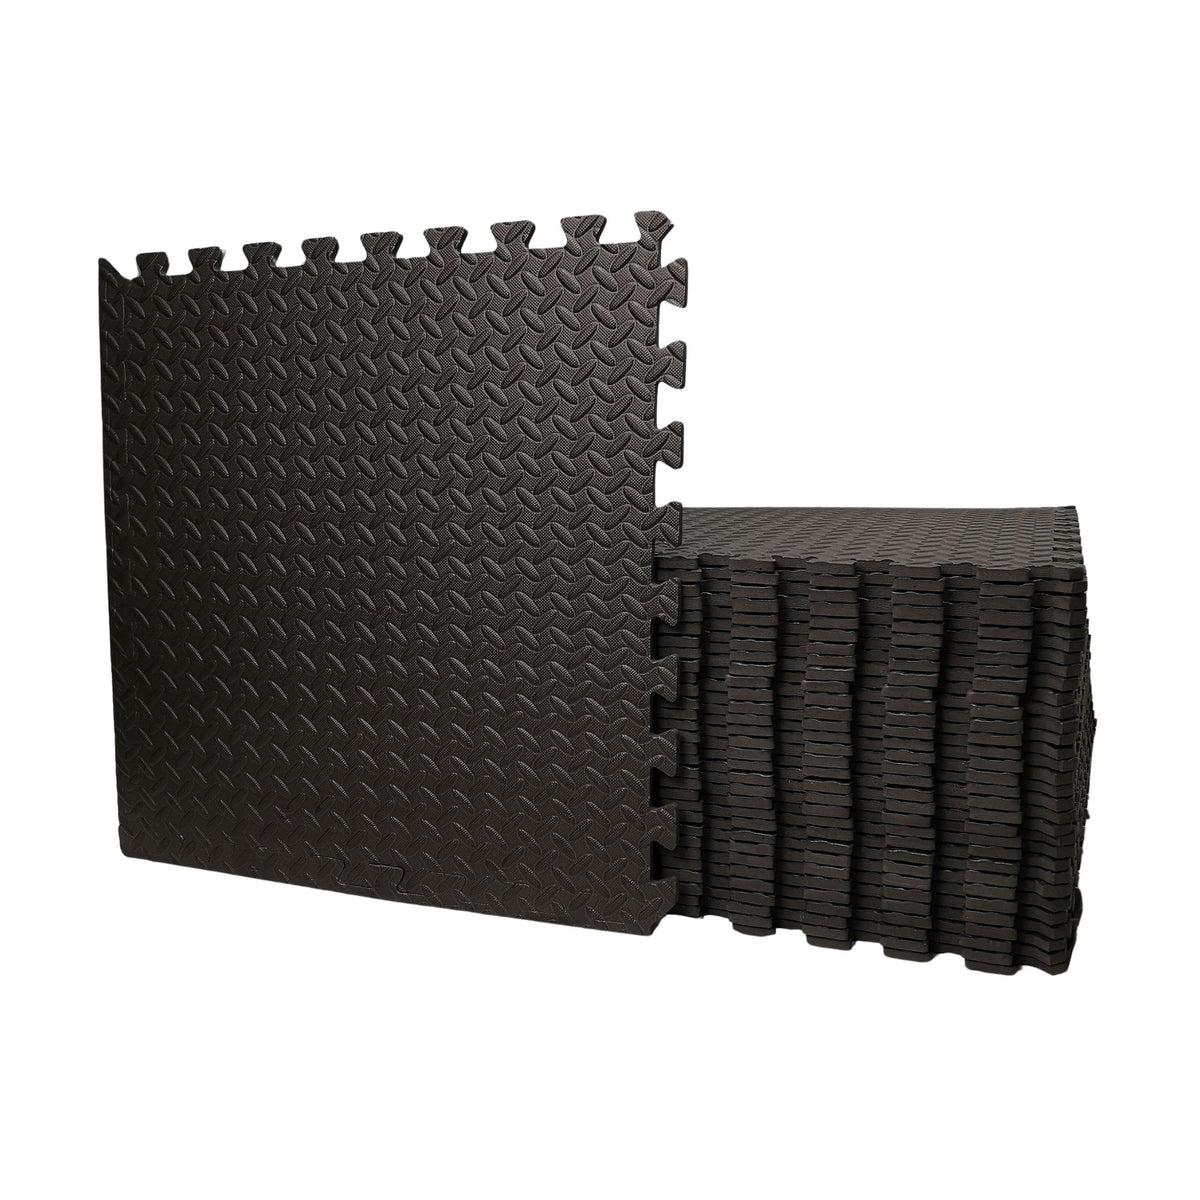 12 Piece EVA Foam Floor Protective Floor Tiles / Mats 60x60cm For Gyms, Garages, Camping, Kids Play Matting, Hot Tub Flooring Mats And Much More! Covers 4.32 sqm (46.5 sq ft)